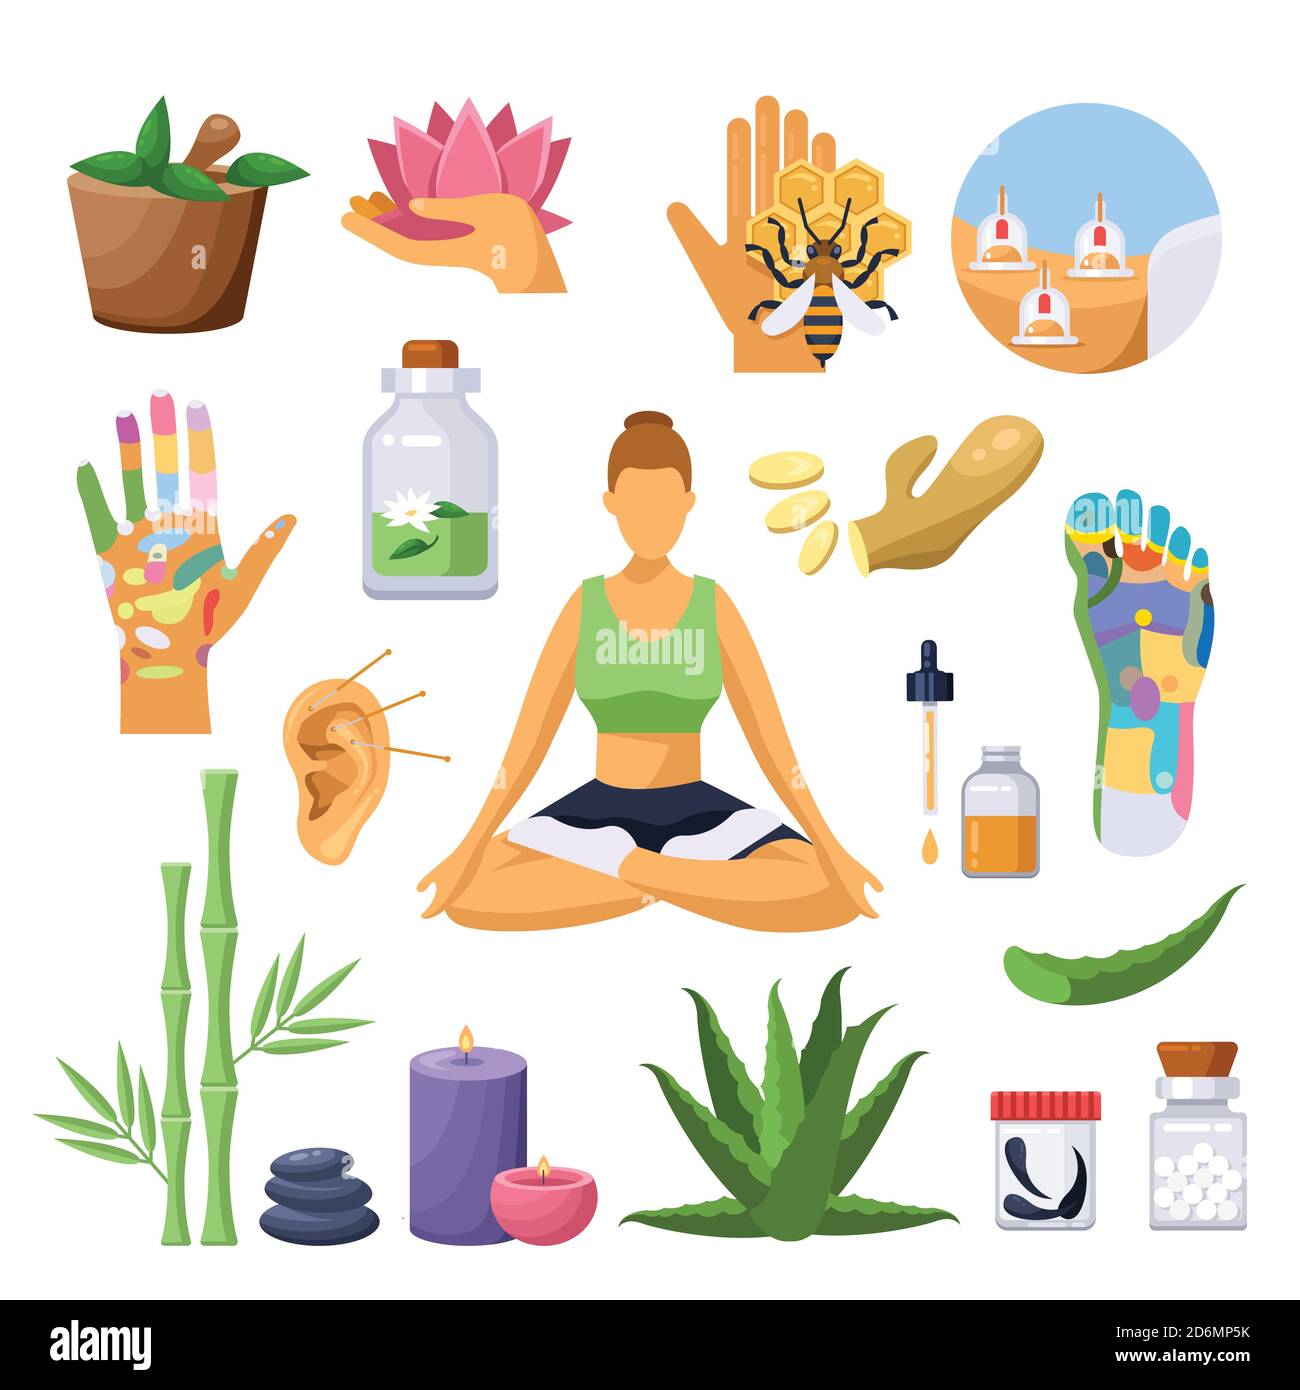 Alternative chinese medicine and treatment symbols. Vector isolated flat illustration. Acupuncture, massage, homeopathy therapy icons set. Stock Vector